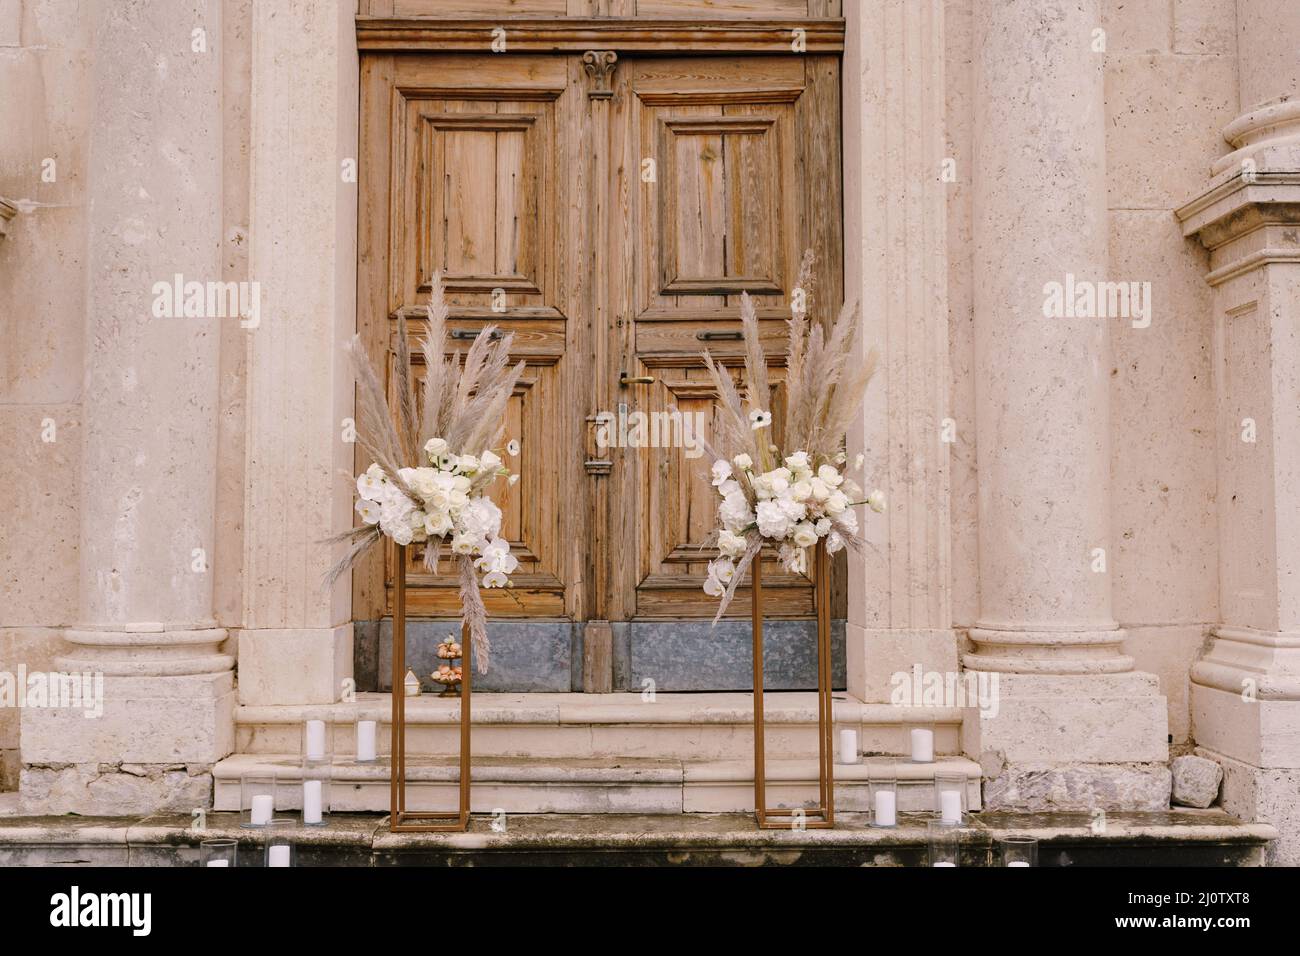 Bouquets of flowers stand on golden plinths in front of a wooden door of the church Stock Photo